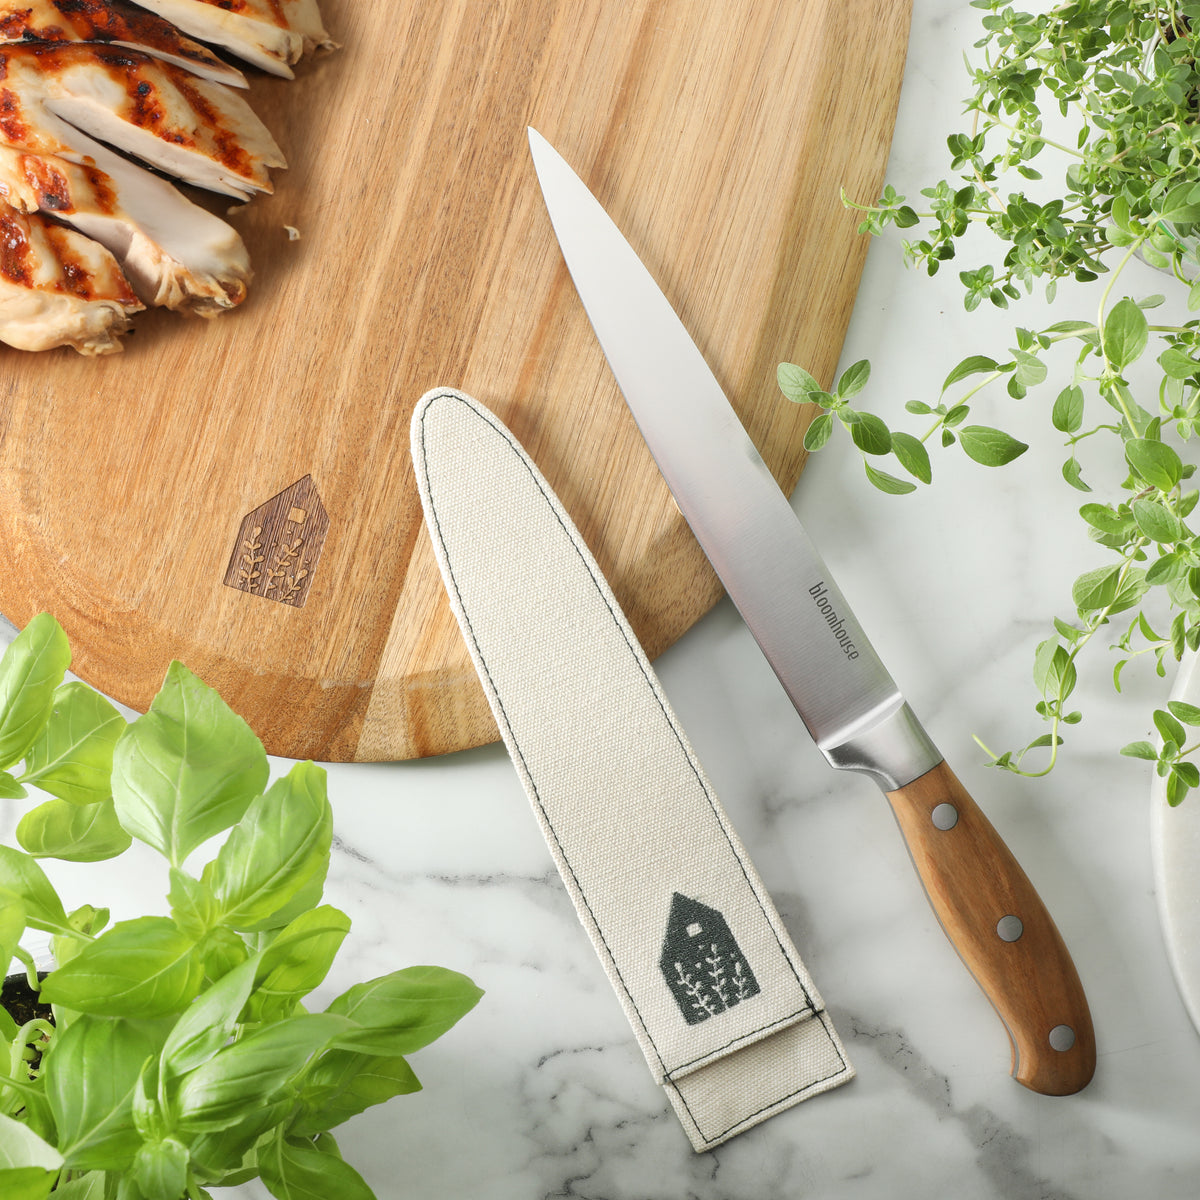 Bloomhouse 8 Inch Chef Knife made with Olive Wood and German Steel -  bloomhousecollection